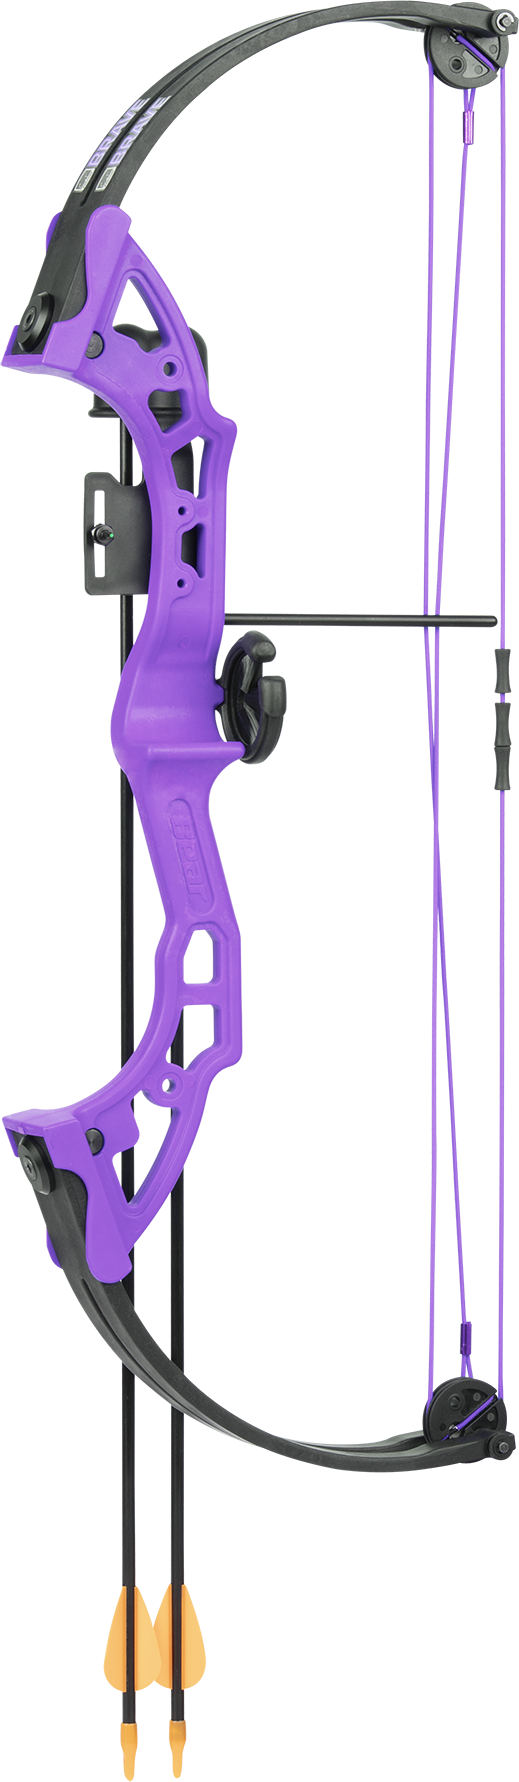 Bear Brave with Biscuit - Purple Compound Bow - Youth_1